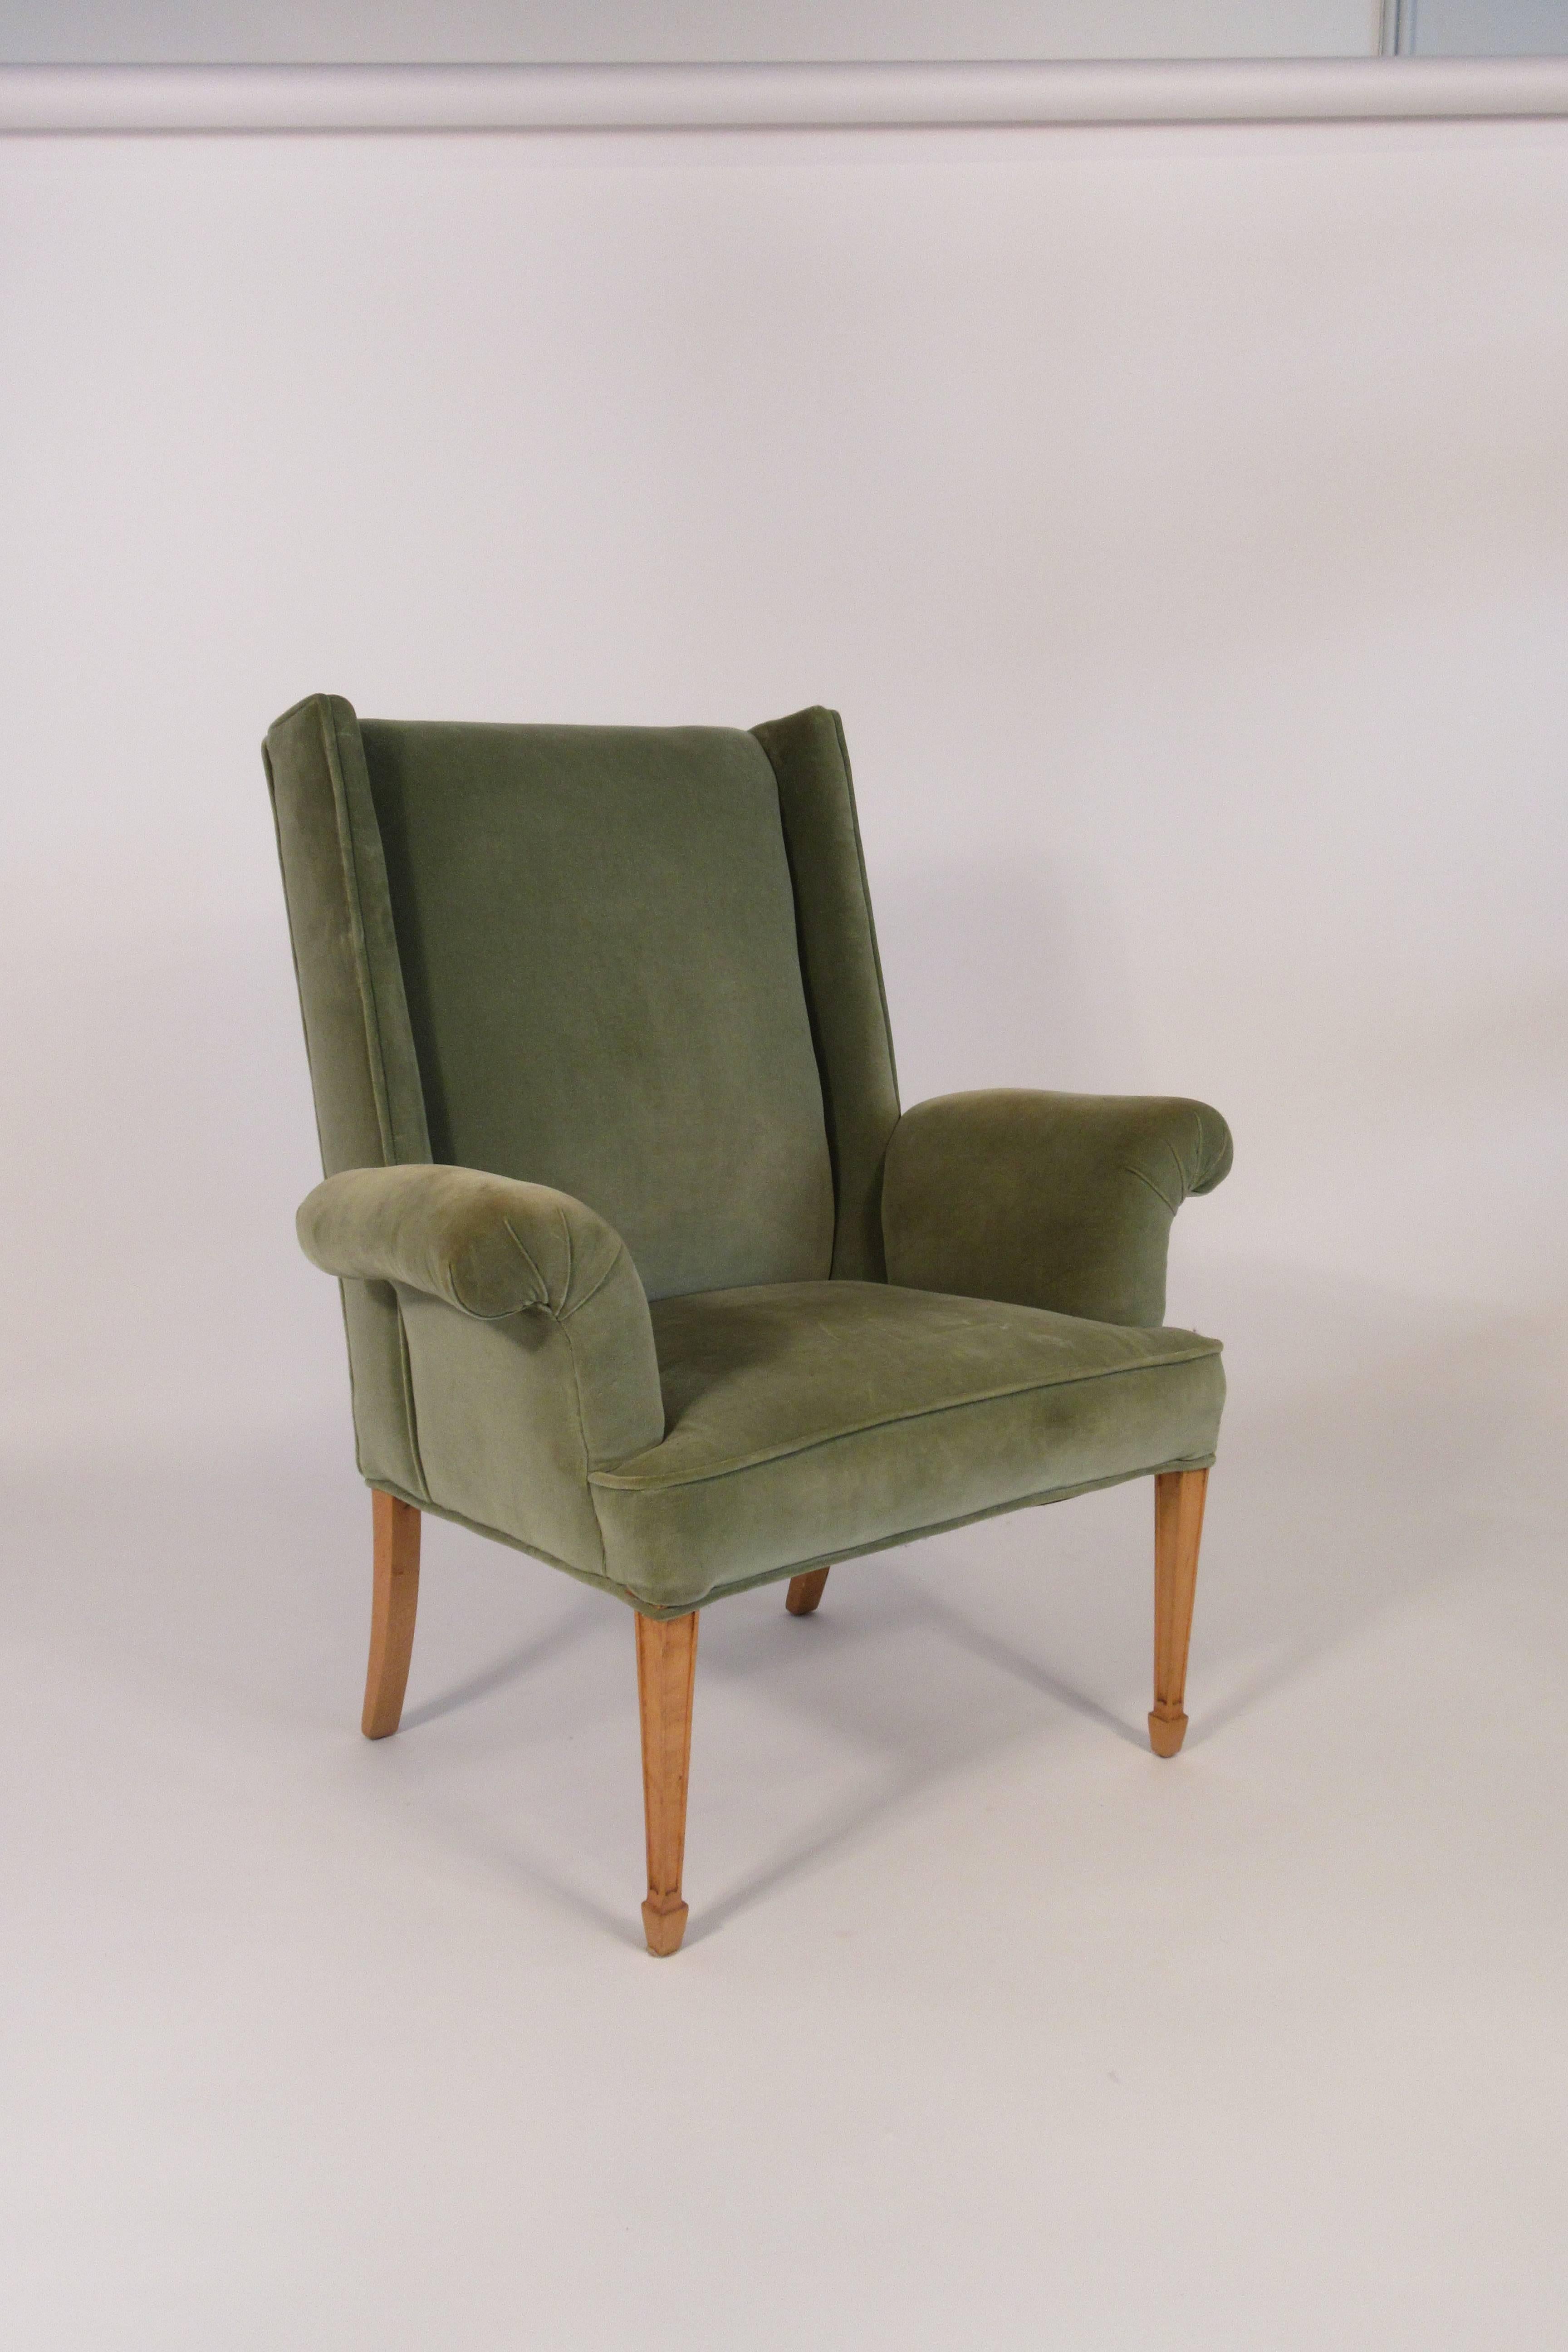 1940s French oversized wingback chair.